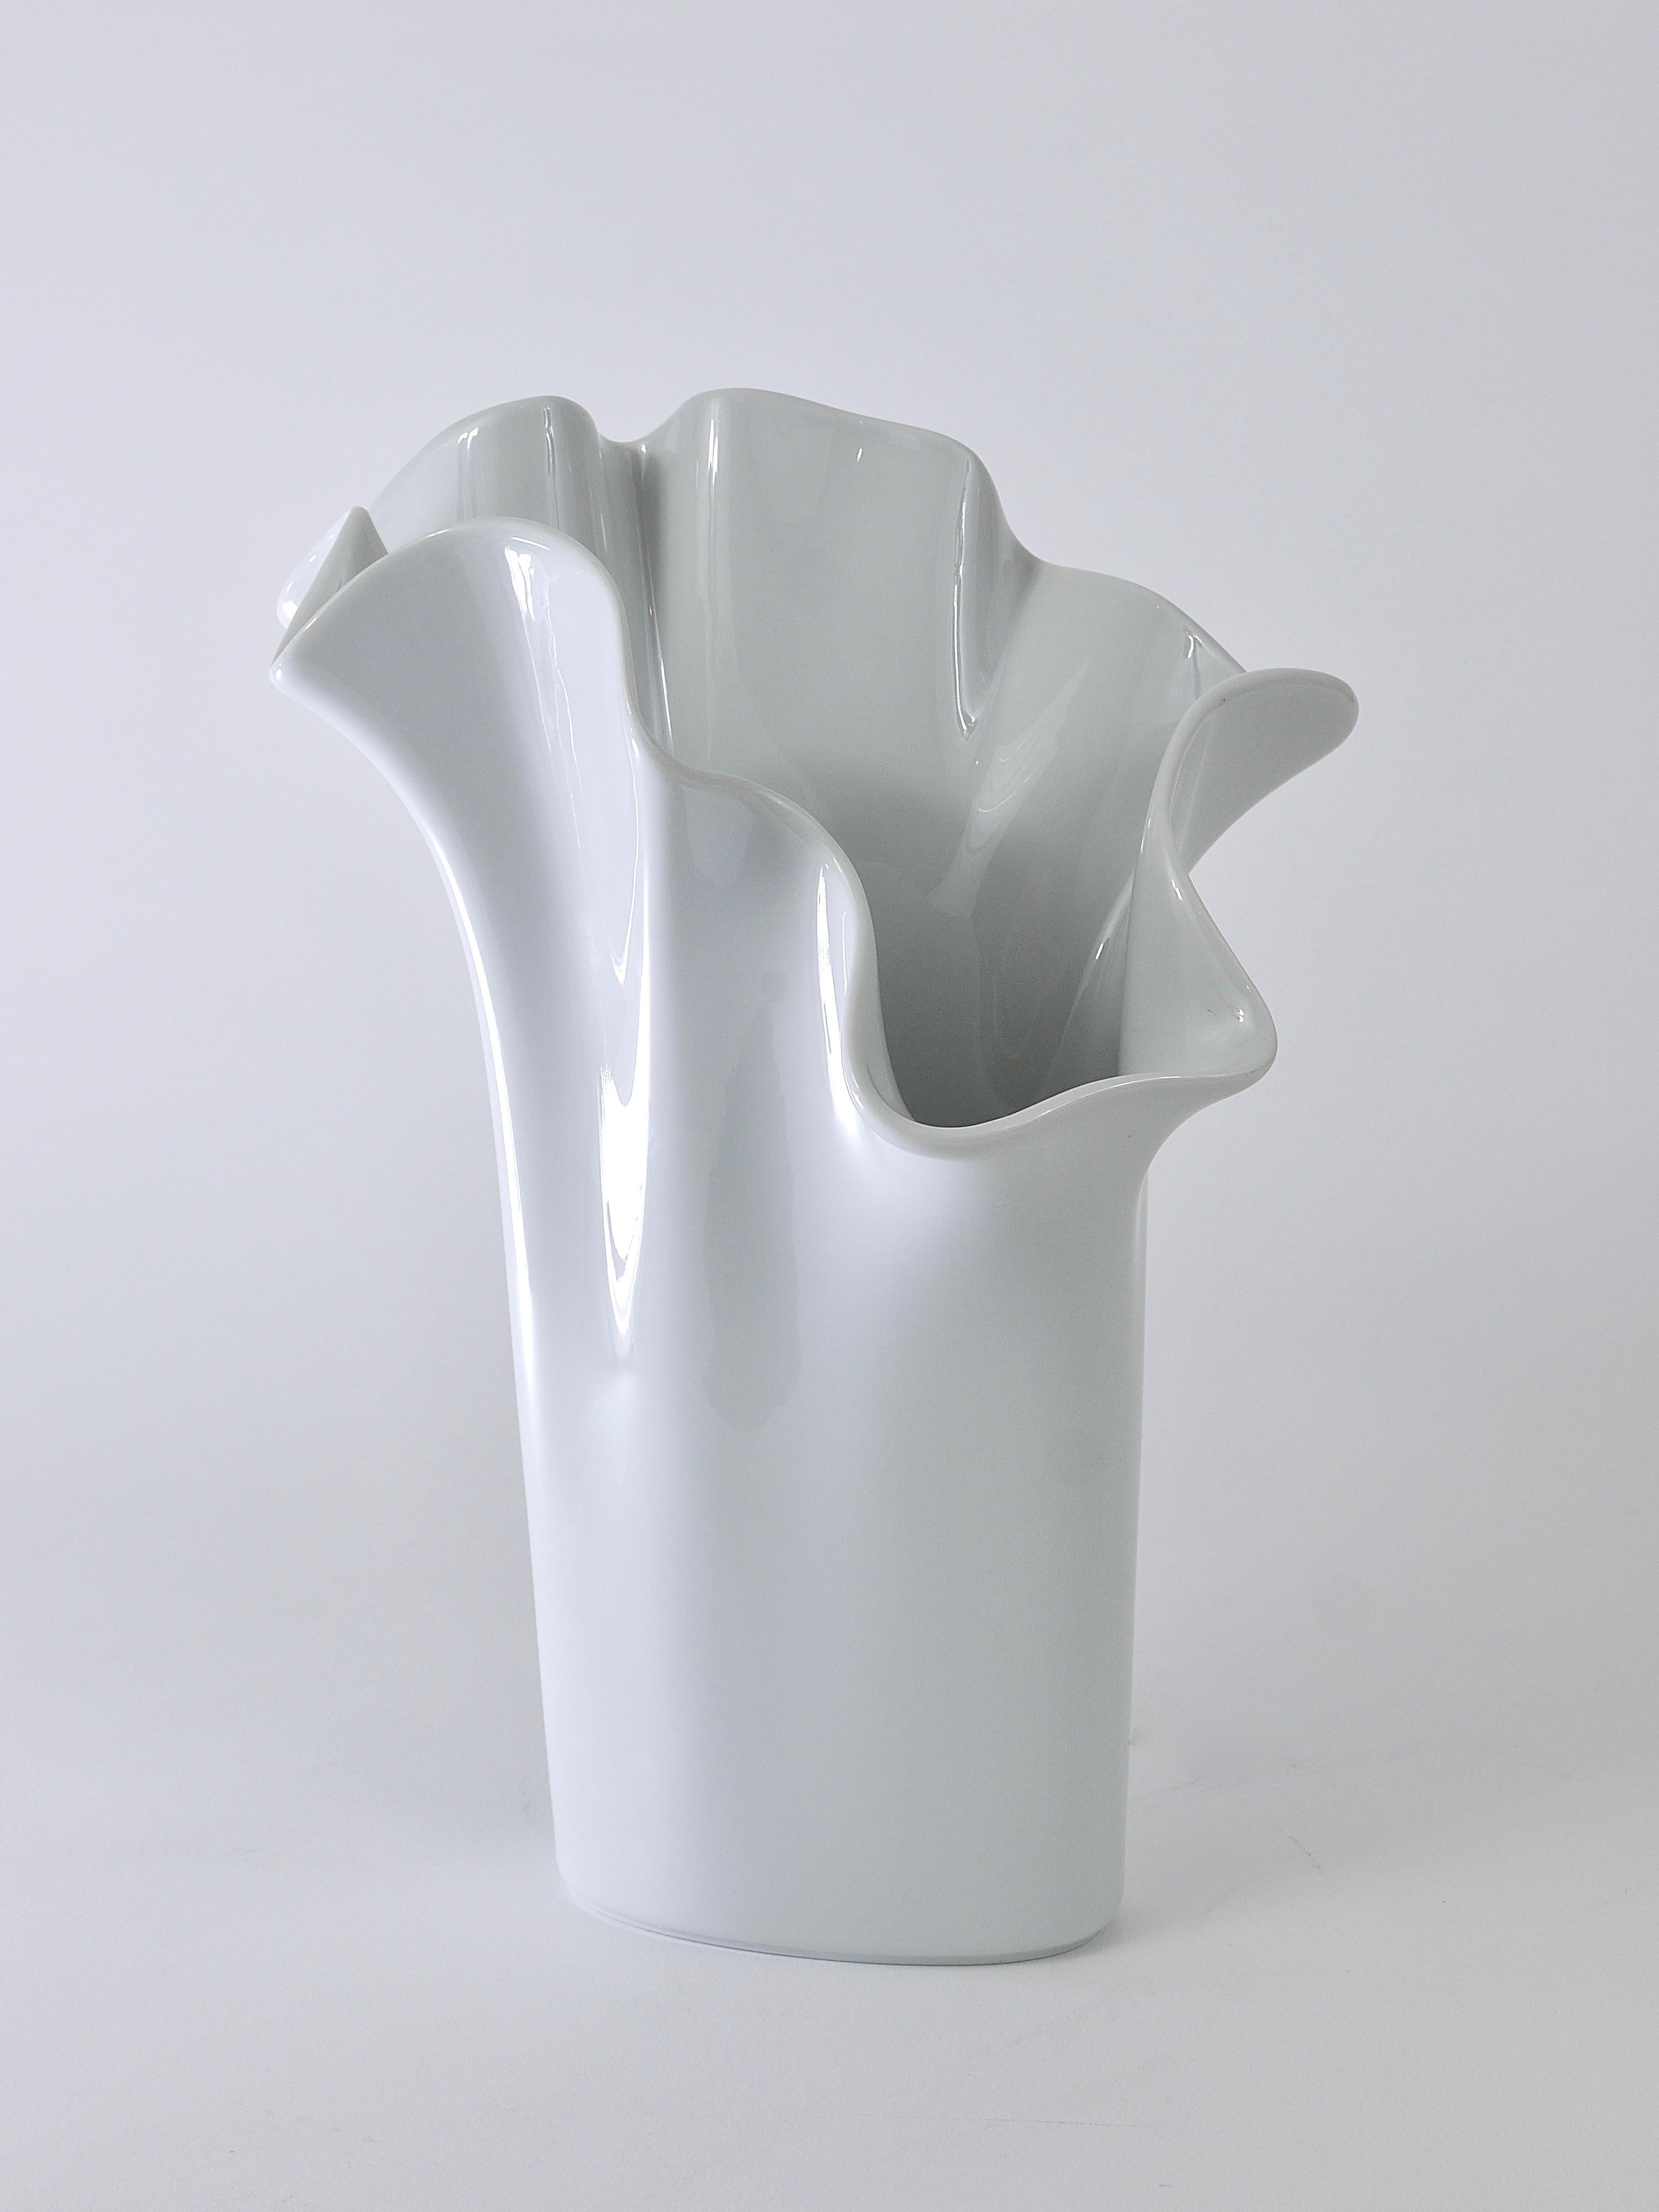 Rosenthal Studio-line Fazzoletto Asym Vase by Claus Josef Riedel, Germany, 1970s 6